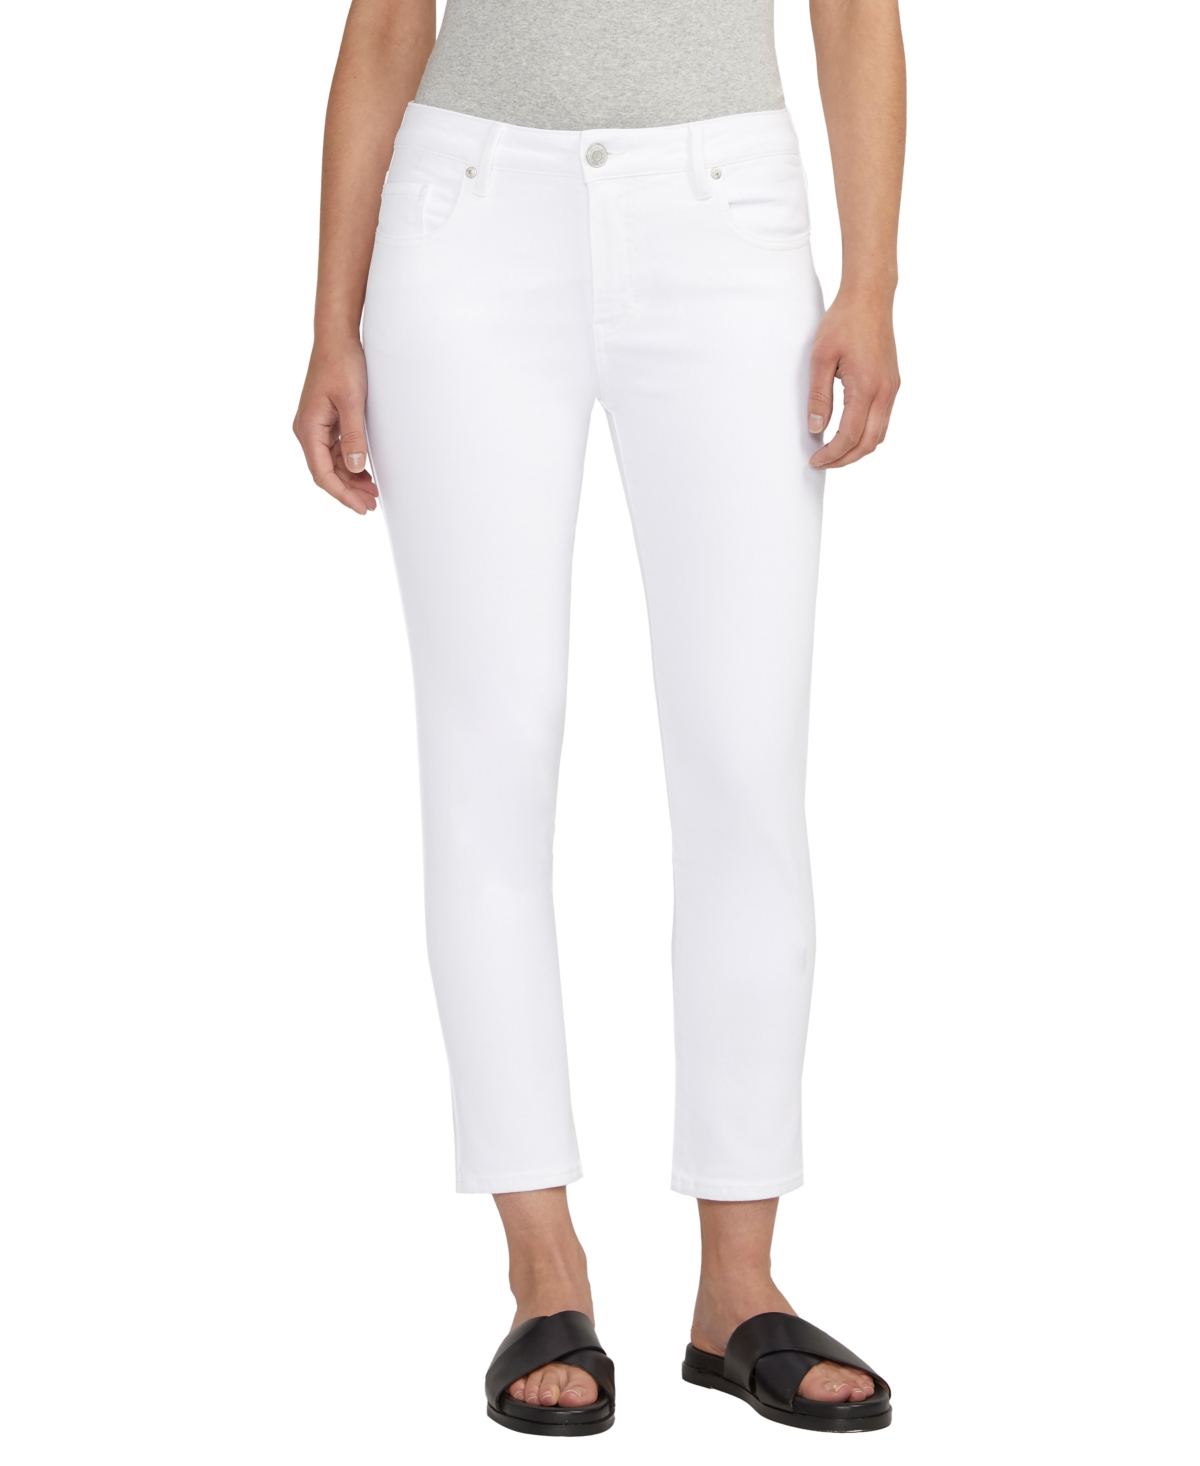 Women's Cassie Mid Rise Cropped Pants - White